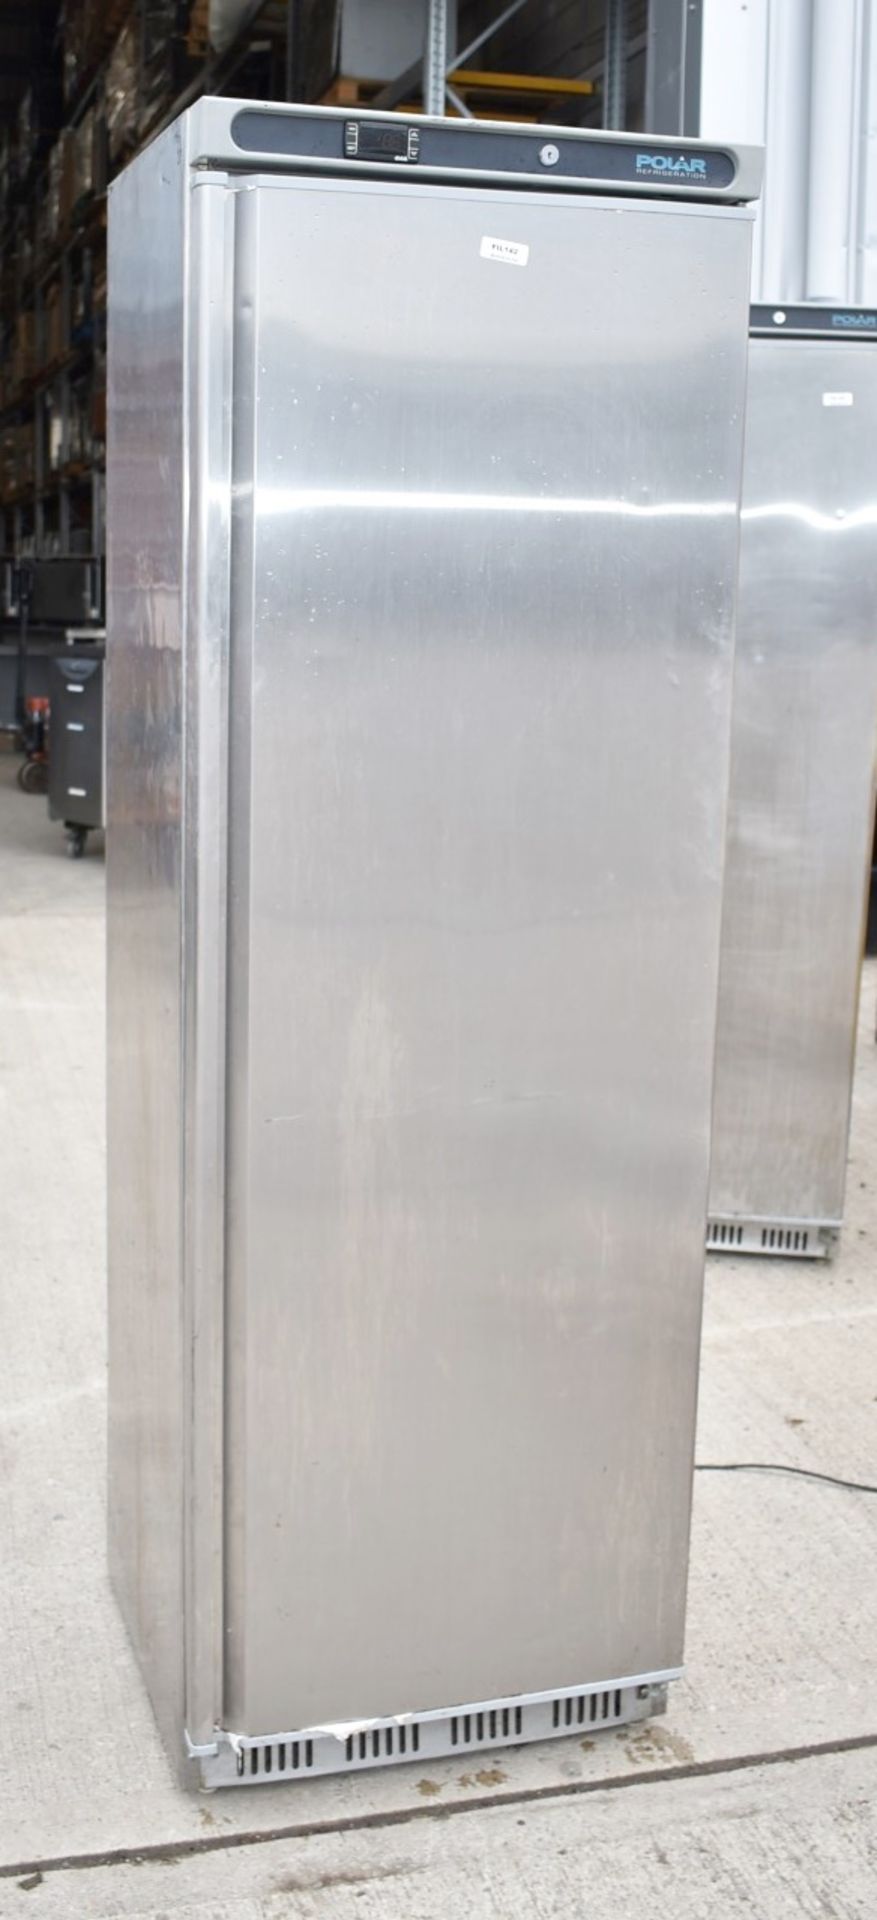 1 x Polar CD083 Upright Freezer With Stainless Steel Exterior - Dimensions: H185 x W60 x D60 cms - Image 2 of 10